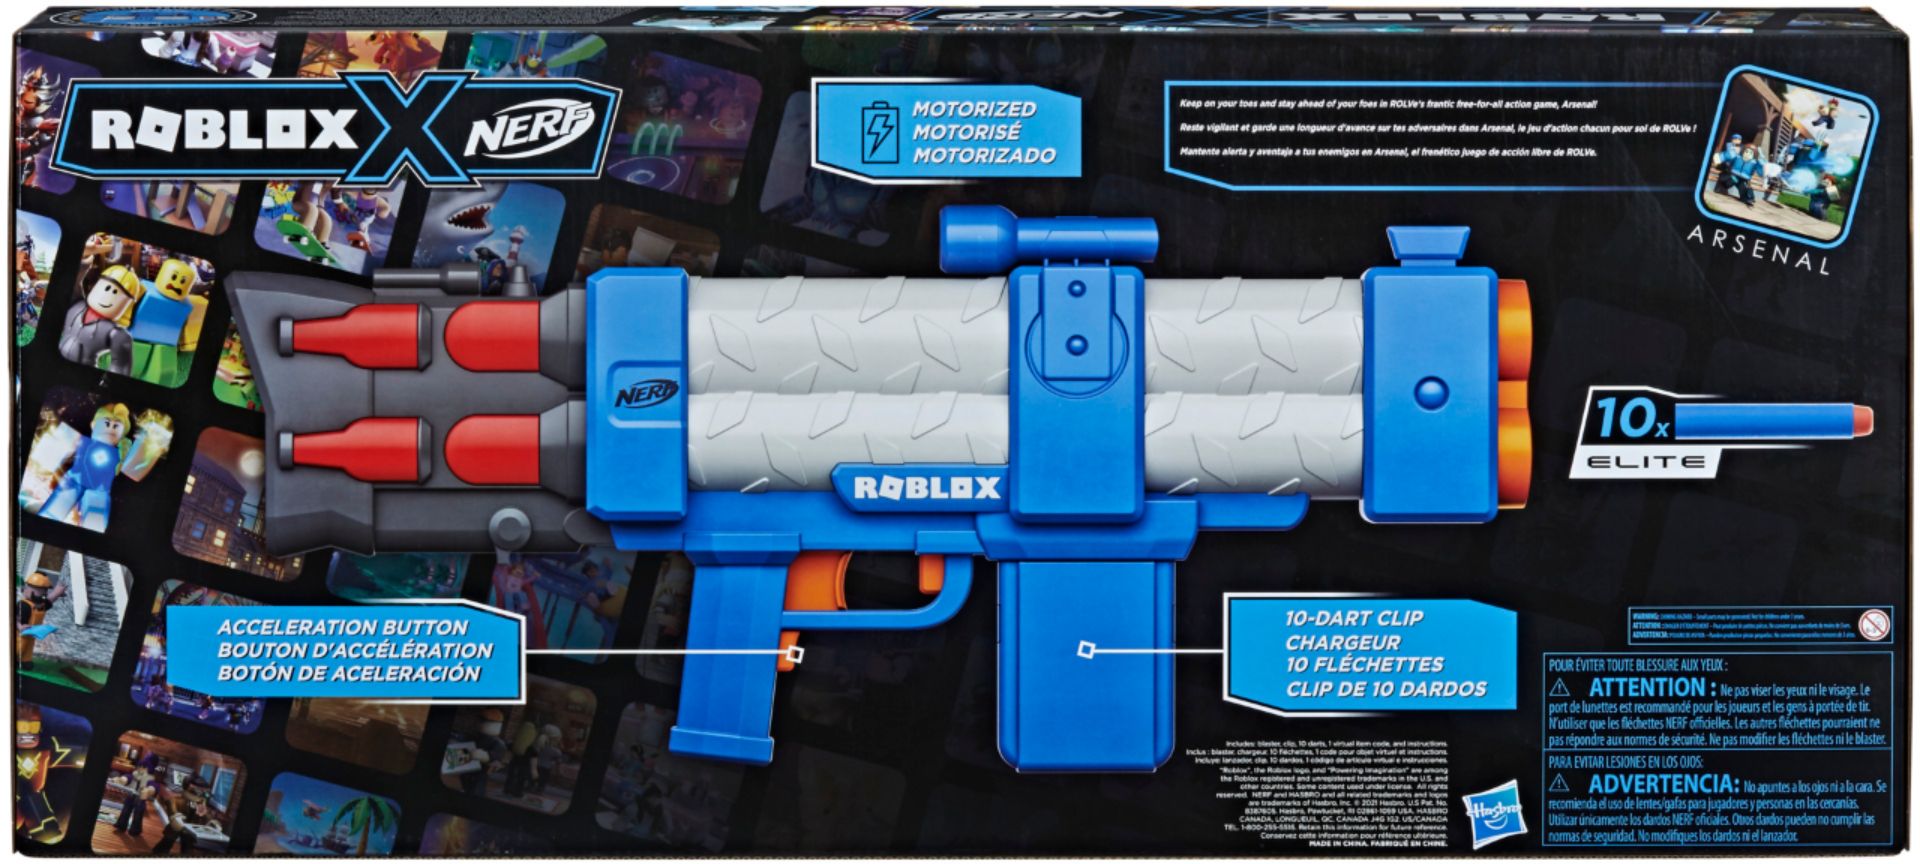 Buy Nerf Roblox Arsenal: Pulse Laser from £14.99 (Today) – Best Deals on